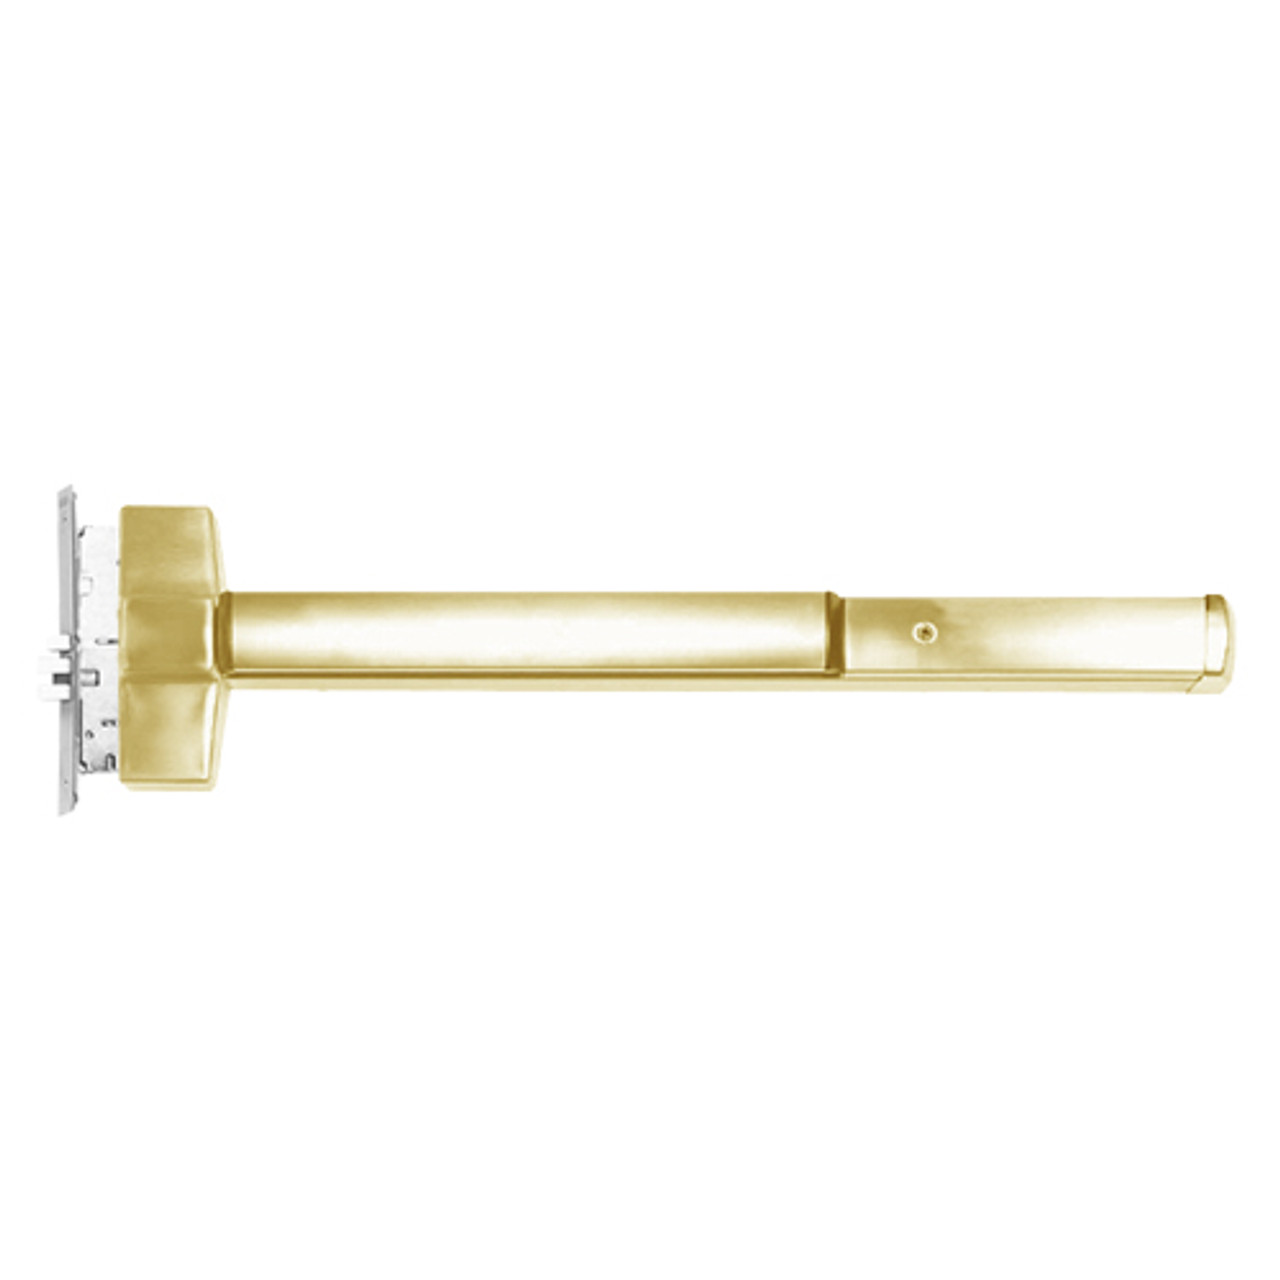 ED5600L-606-M61-LHR Corbin ED5600 Series Non Fire Rated Mortise Exit Device with Exit Alarm Device in Satin Brass Finish